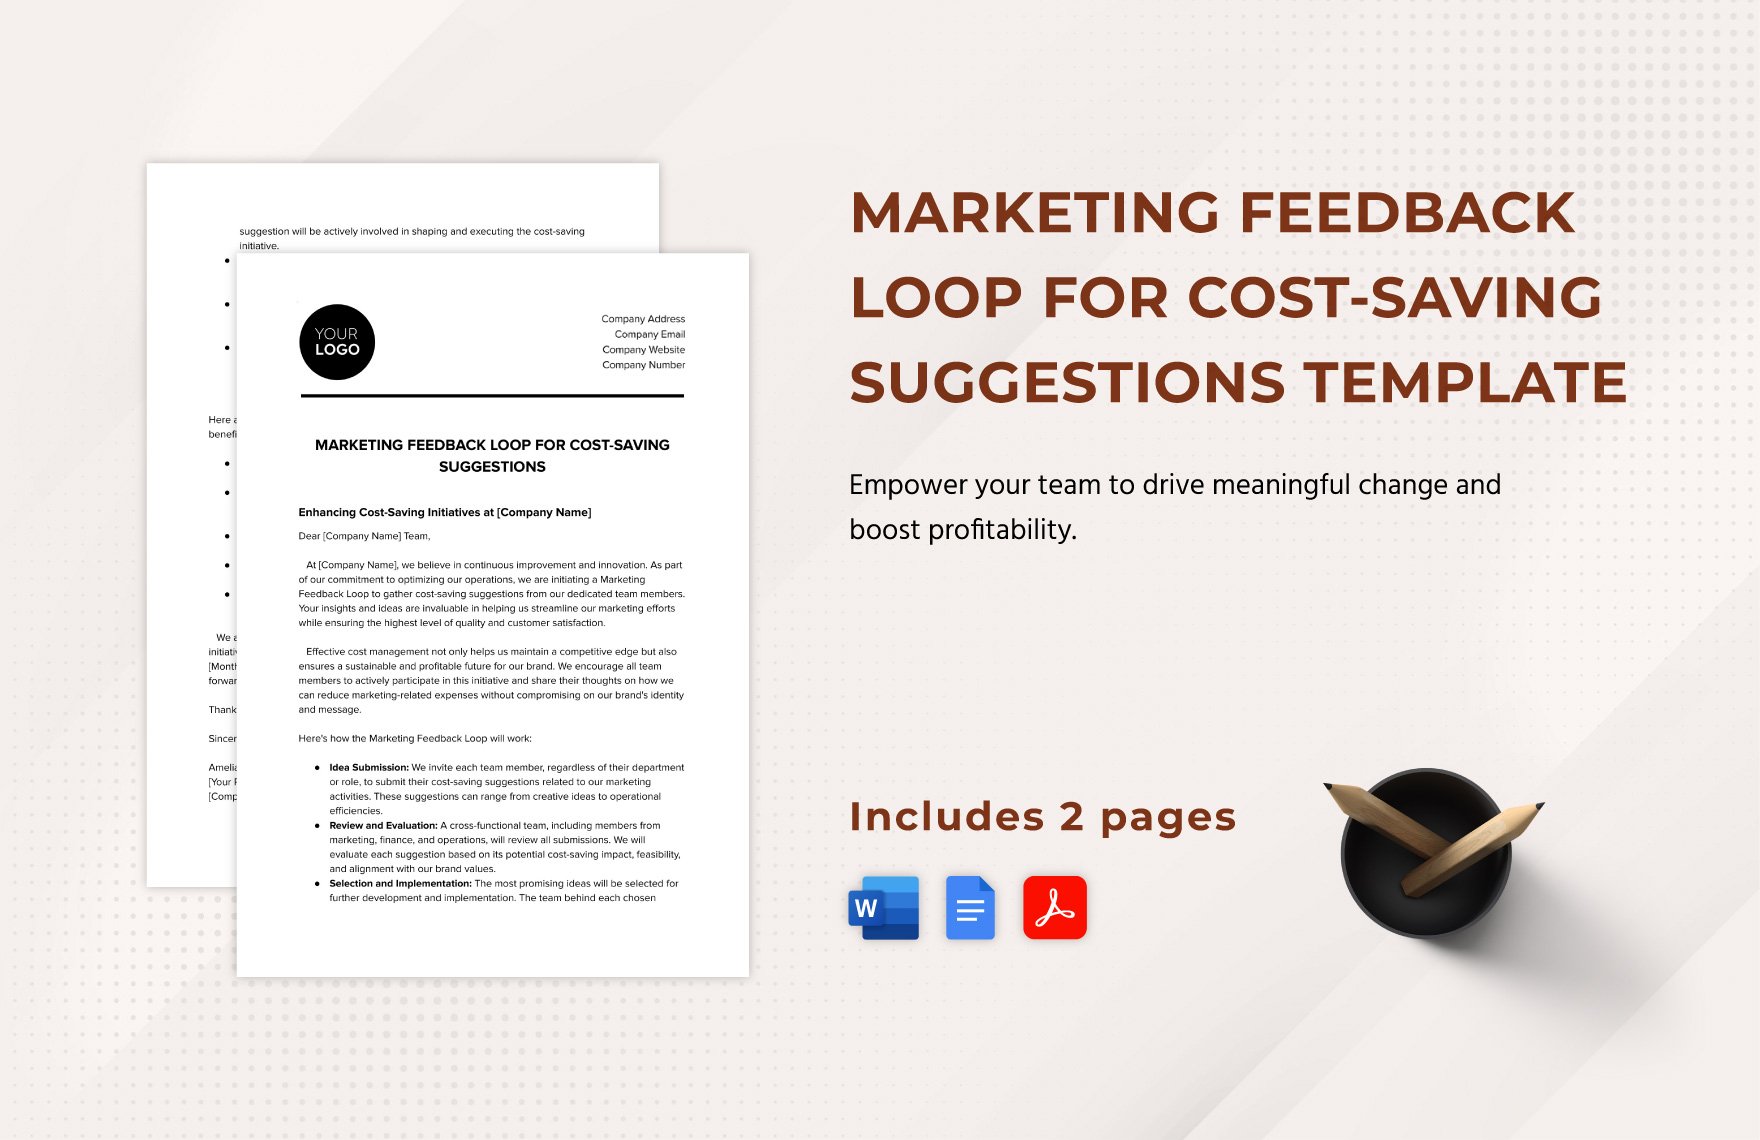 Marketing Feedback Loop for Cost-saving Suggestions Template